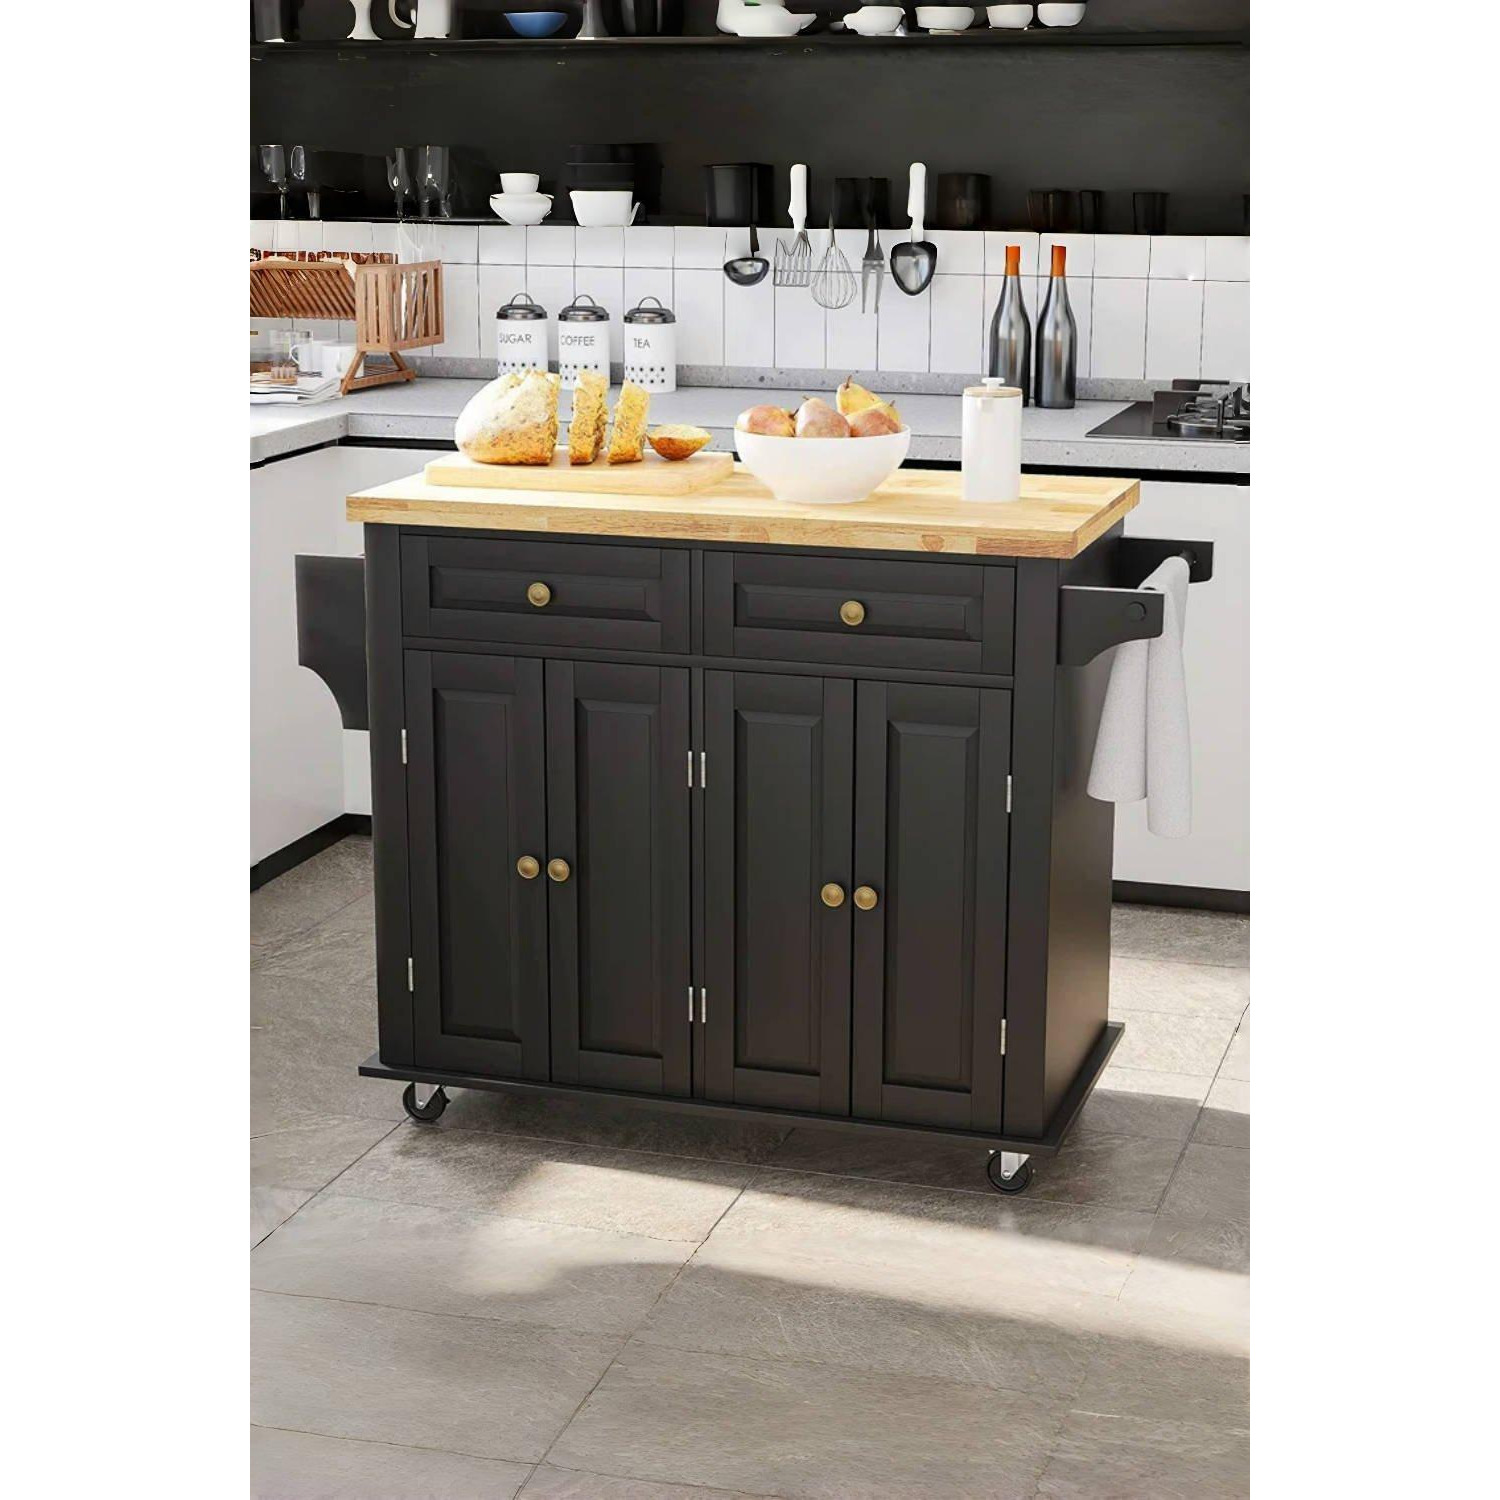 106cm W x 93cm H Black Kitchen Catering Trolley with 4 Doors and 2 Drawers - image 1